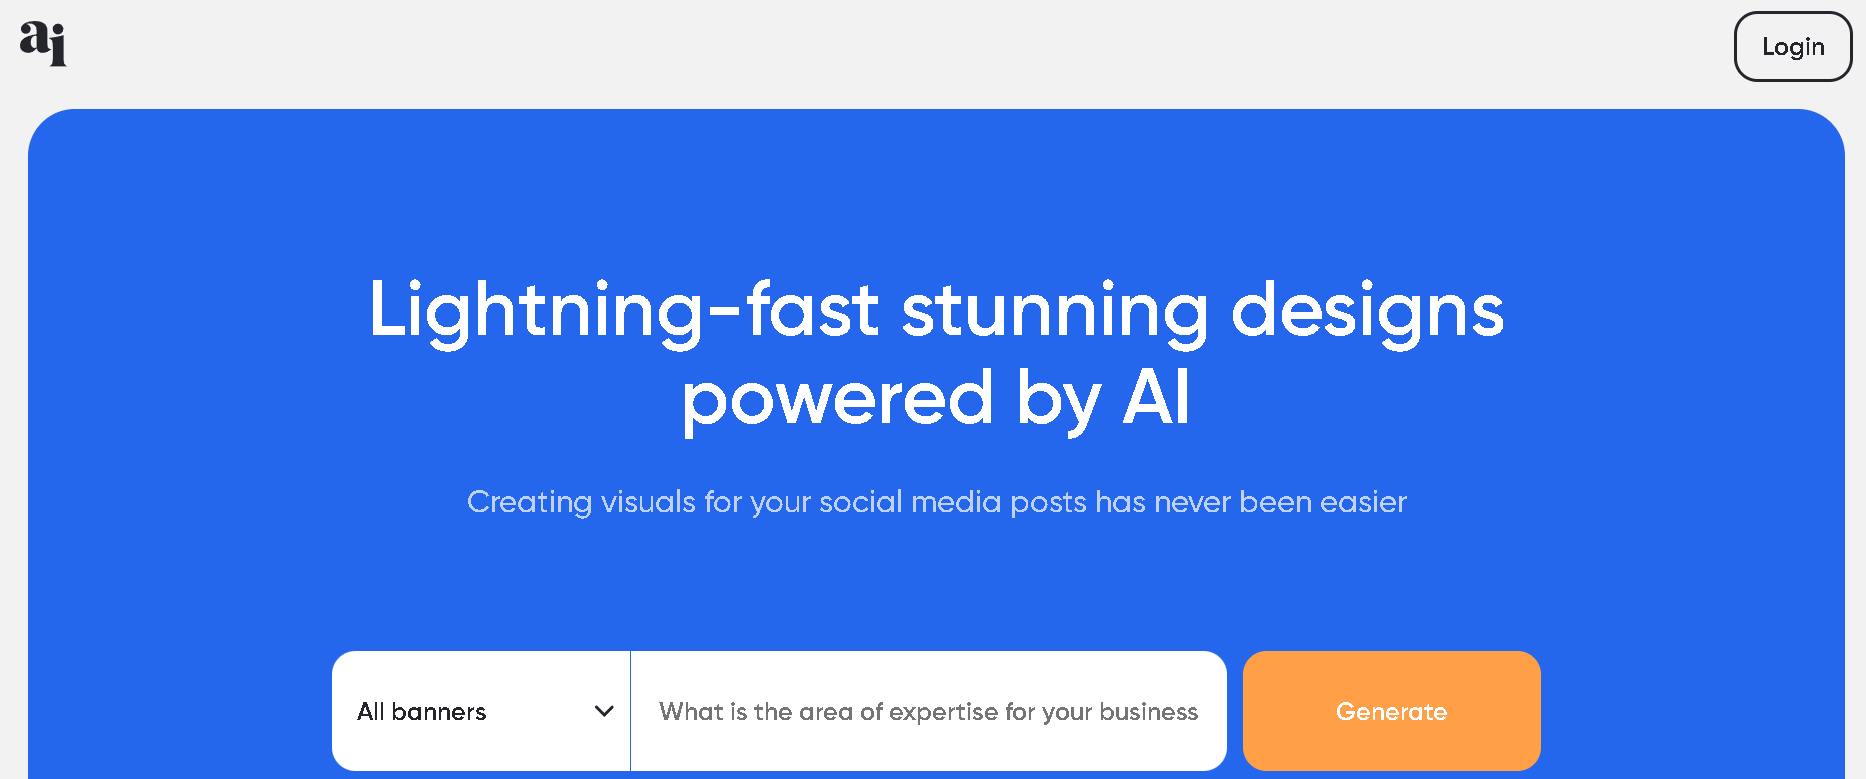 Lightning-fast stunning designs powered by AI